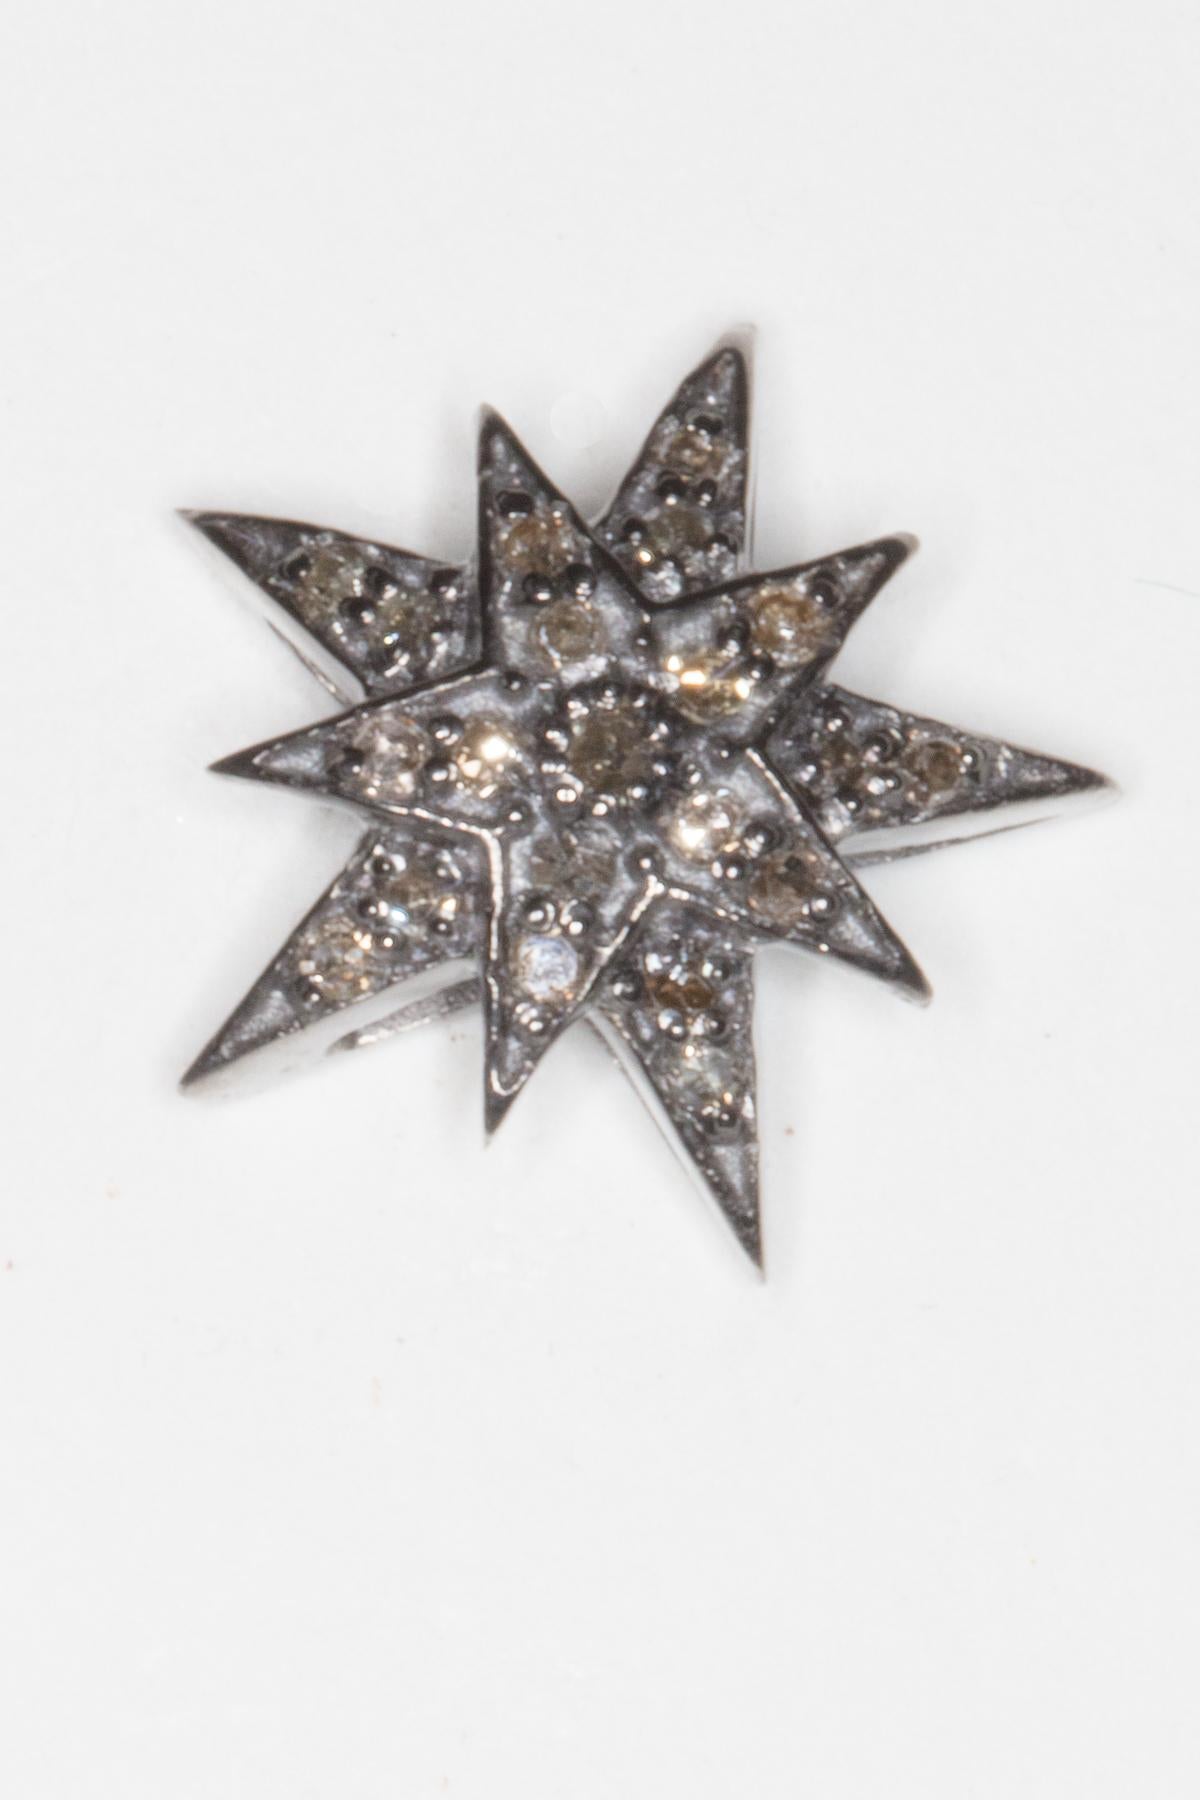 A pair of pave`-set diamond stud earrings in a dimensional star motif.    Oxidized sterling silver and 18k gold post for pierced ears.  Diamond weight is .36 carats.

